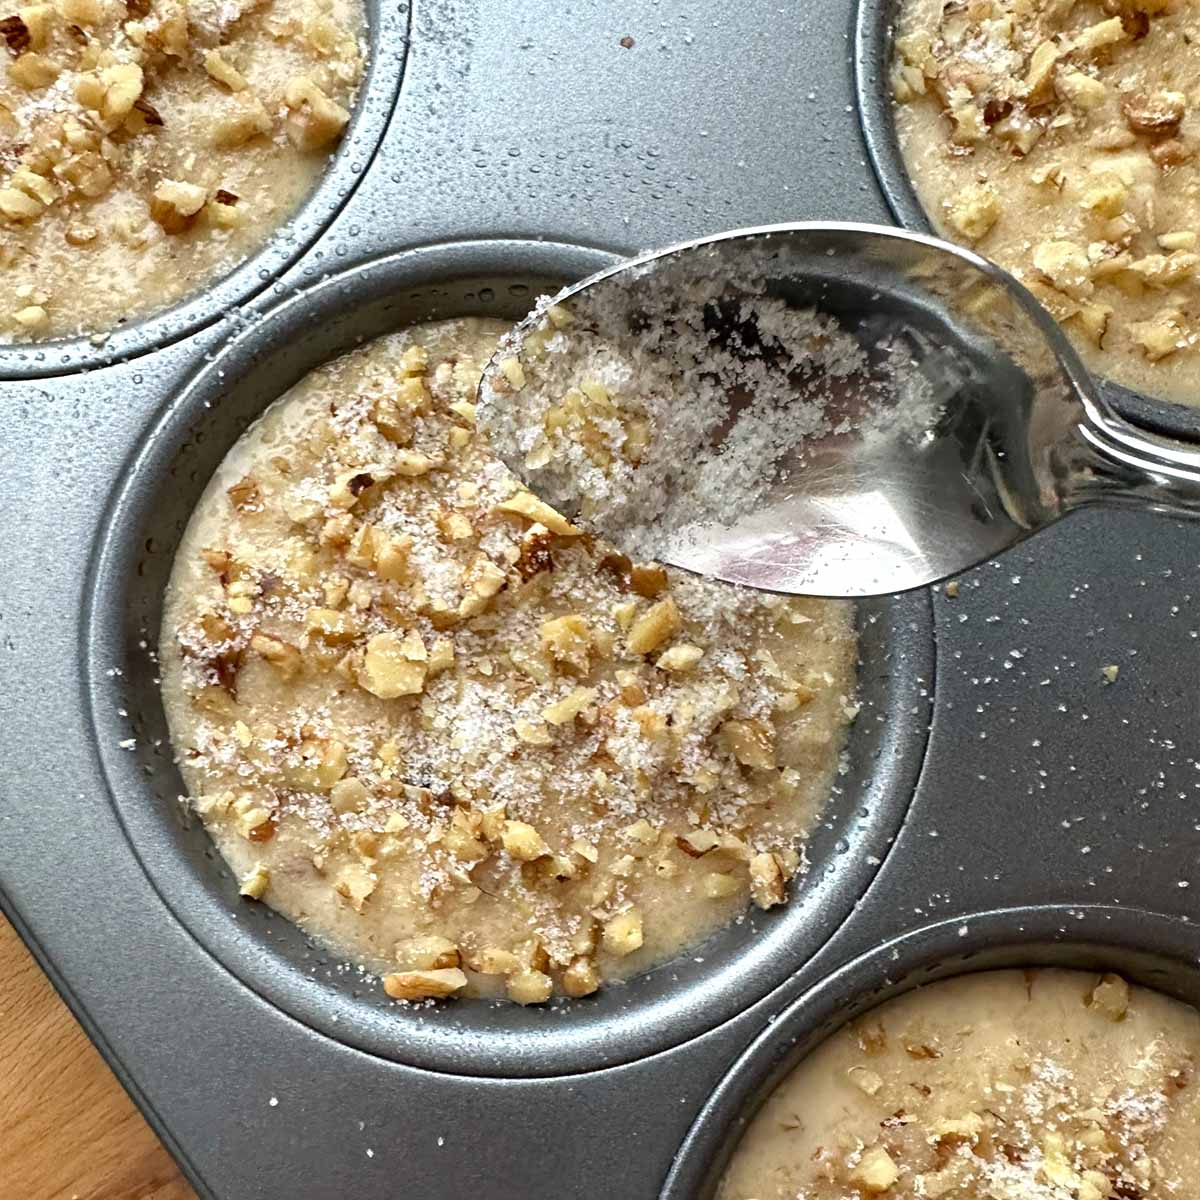 Muffin batter in tin with spoon sprinkling the nut and sugar topping on top.